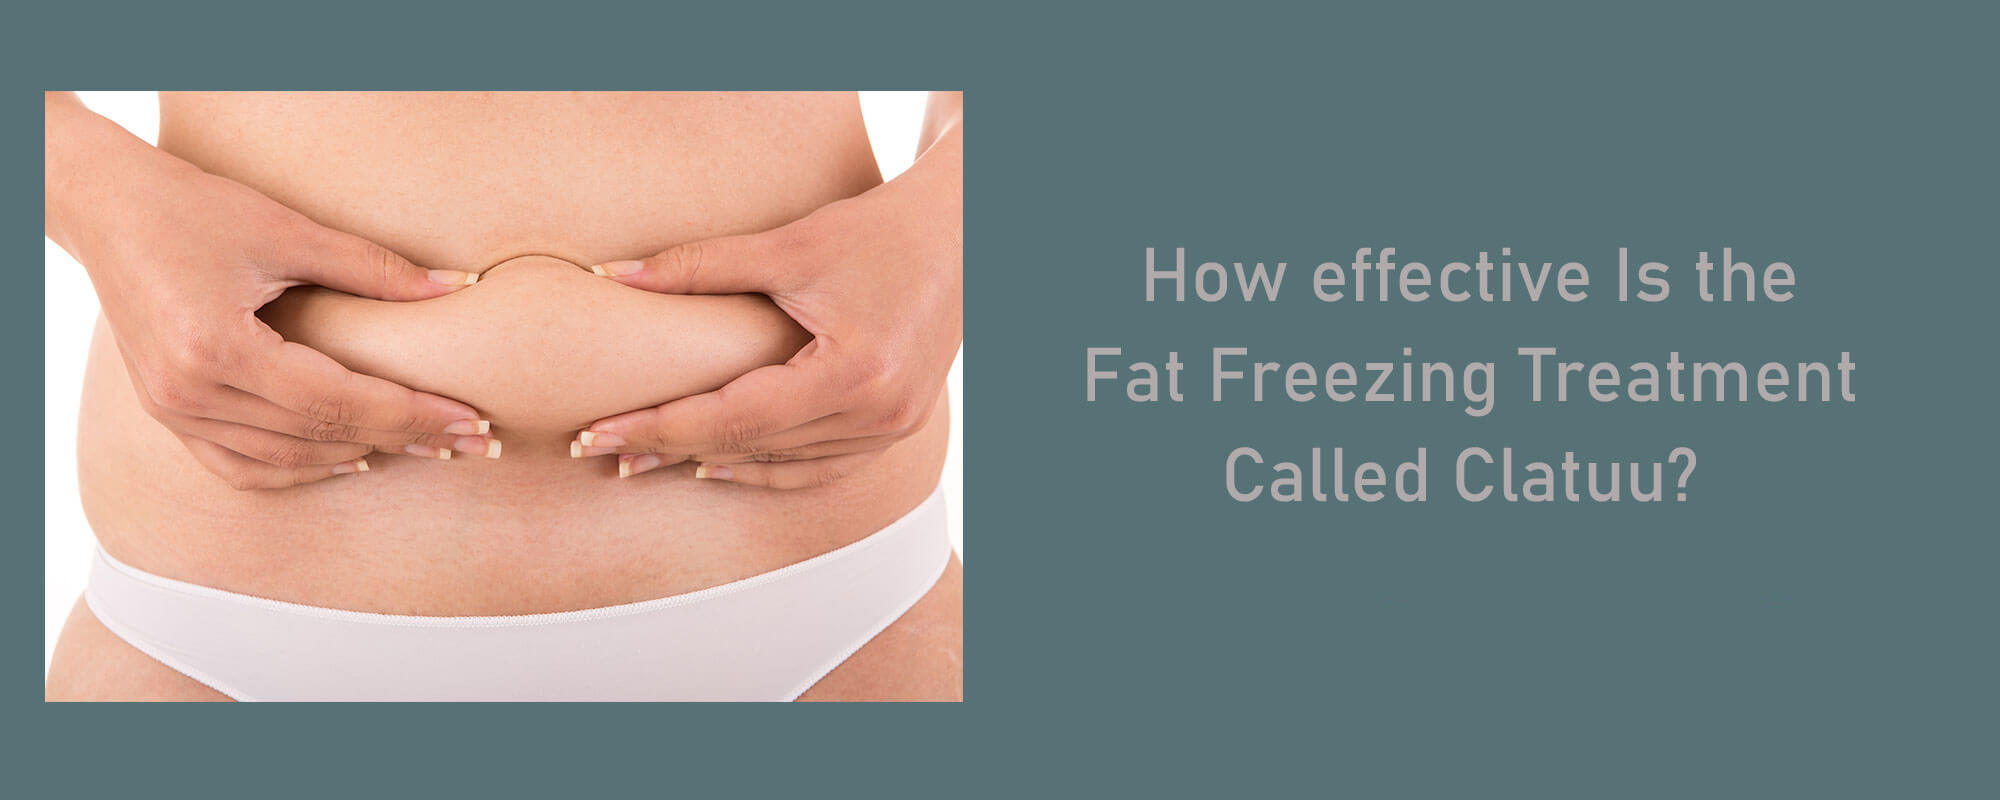 How effective Is the Fat Freezing Treatment Called Clatuu? - 1